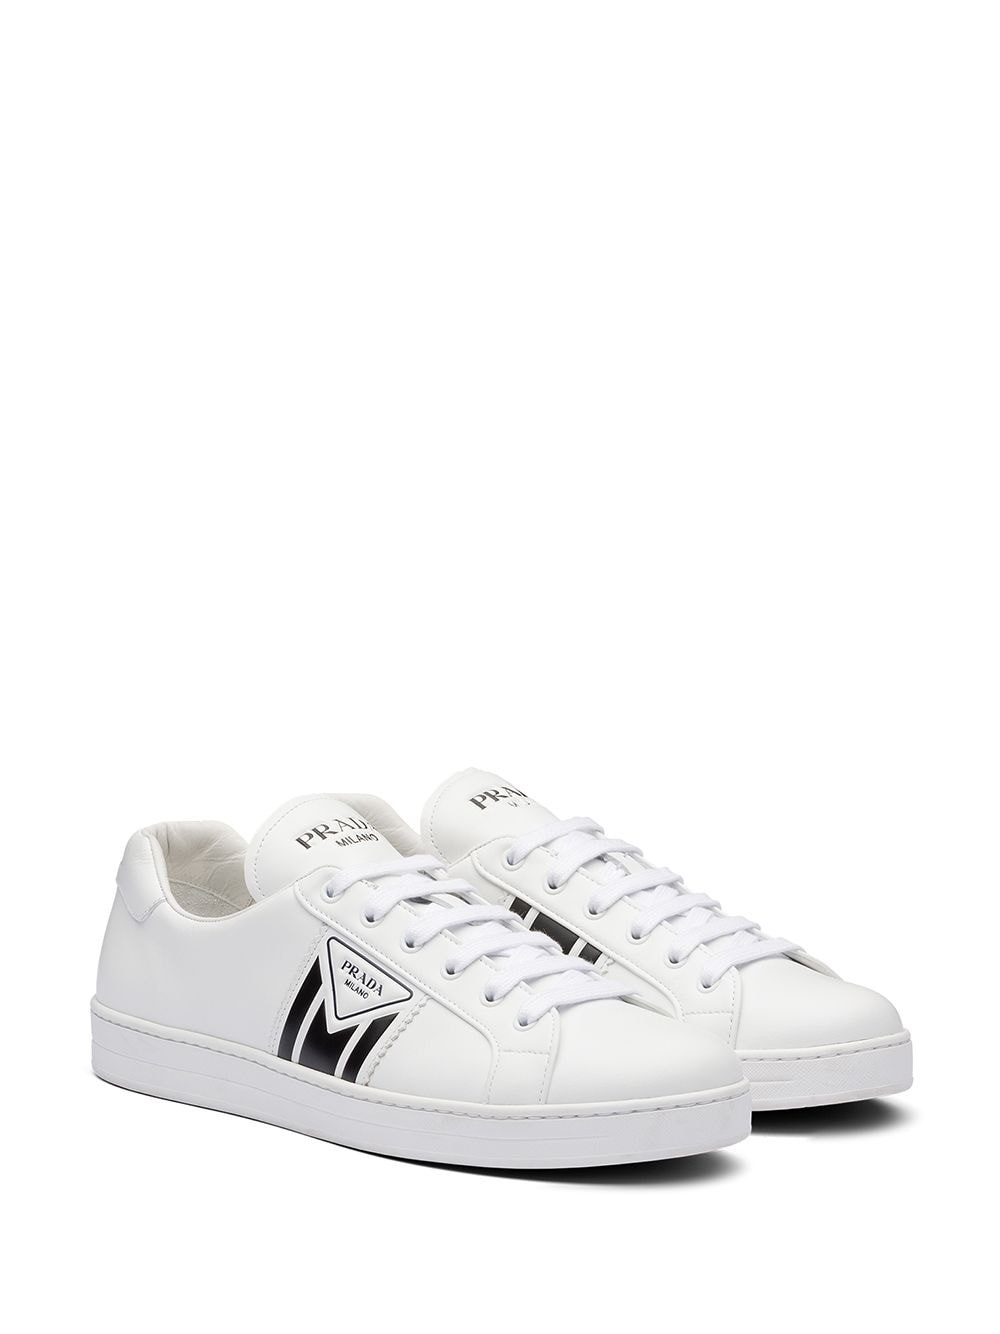 prada SNEAKERS available on montiboutique.com - 35149